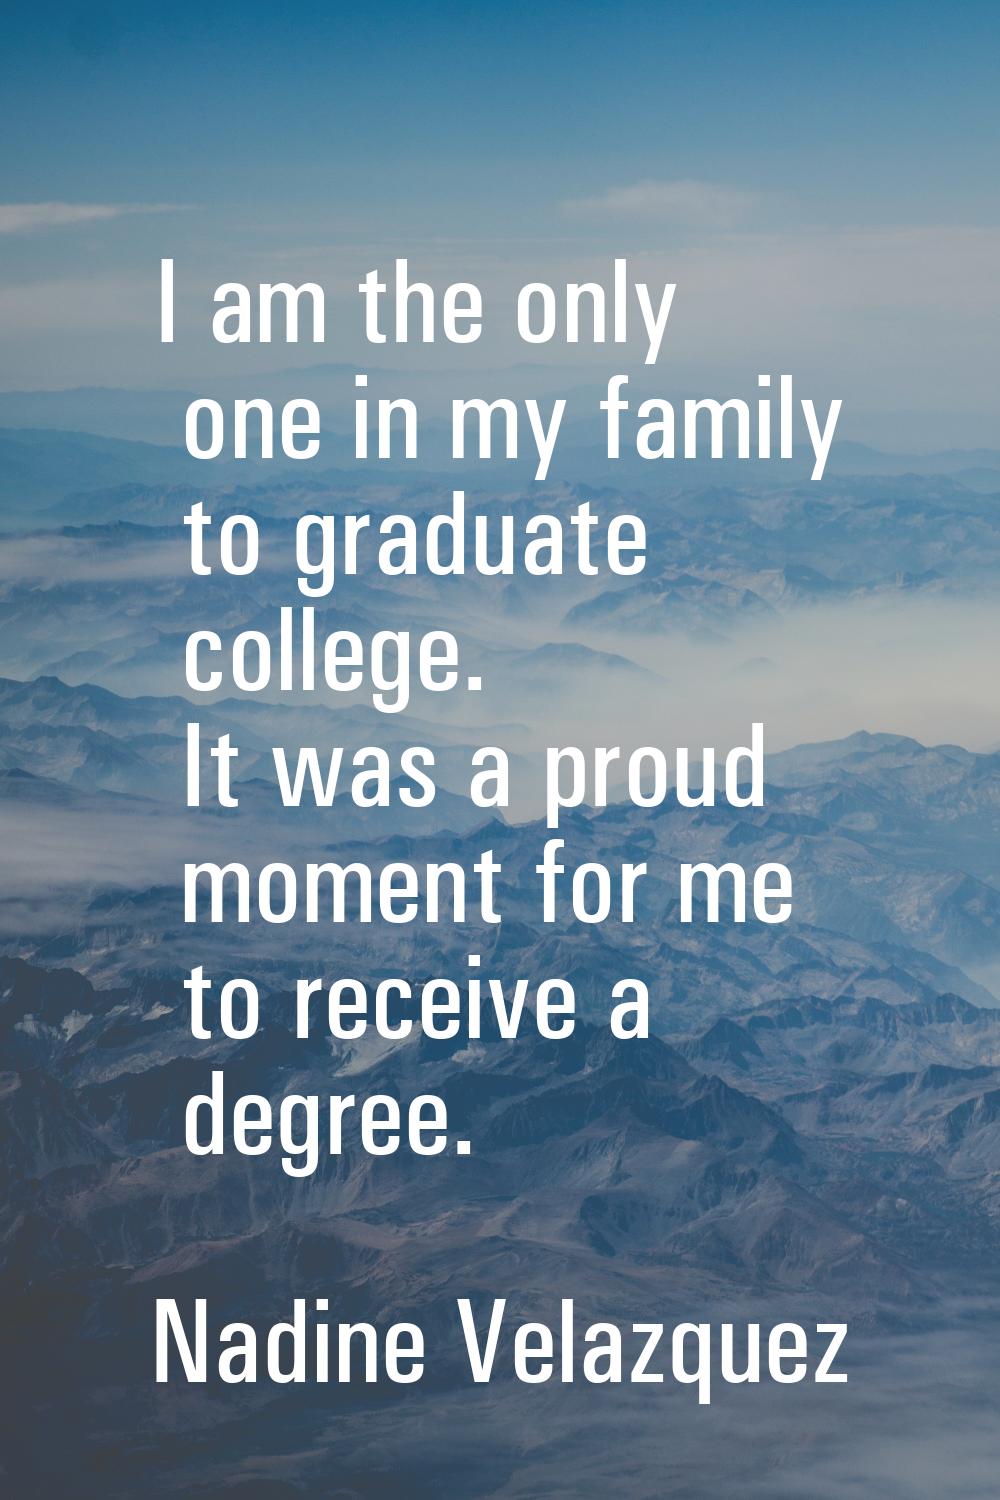 I am the only one in my family to graduate college. It was a proud moment for me to receive a degre